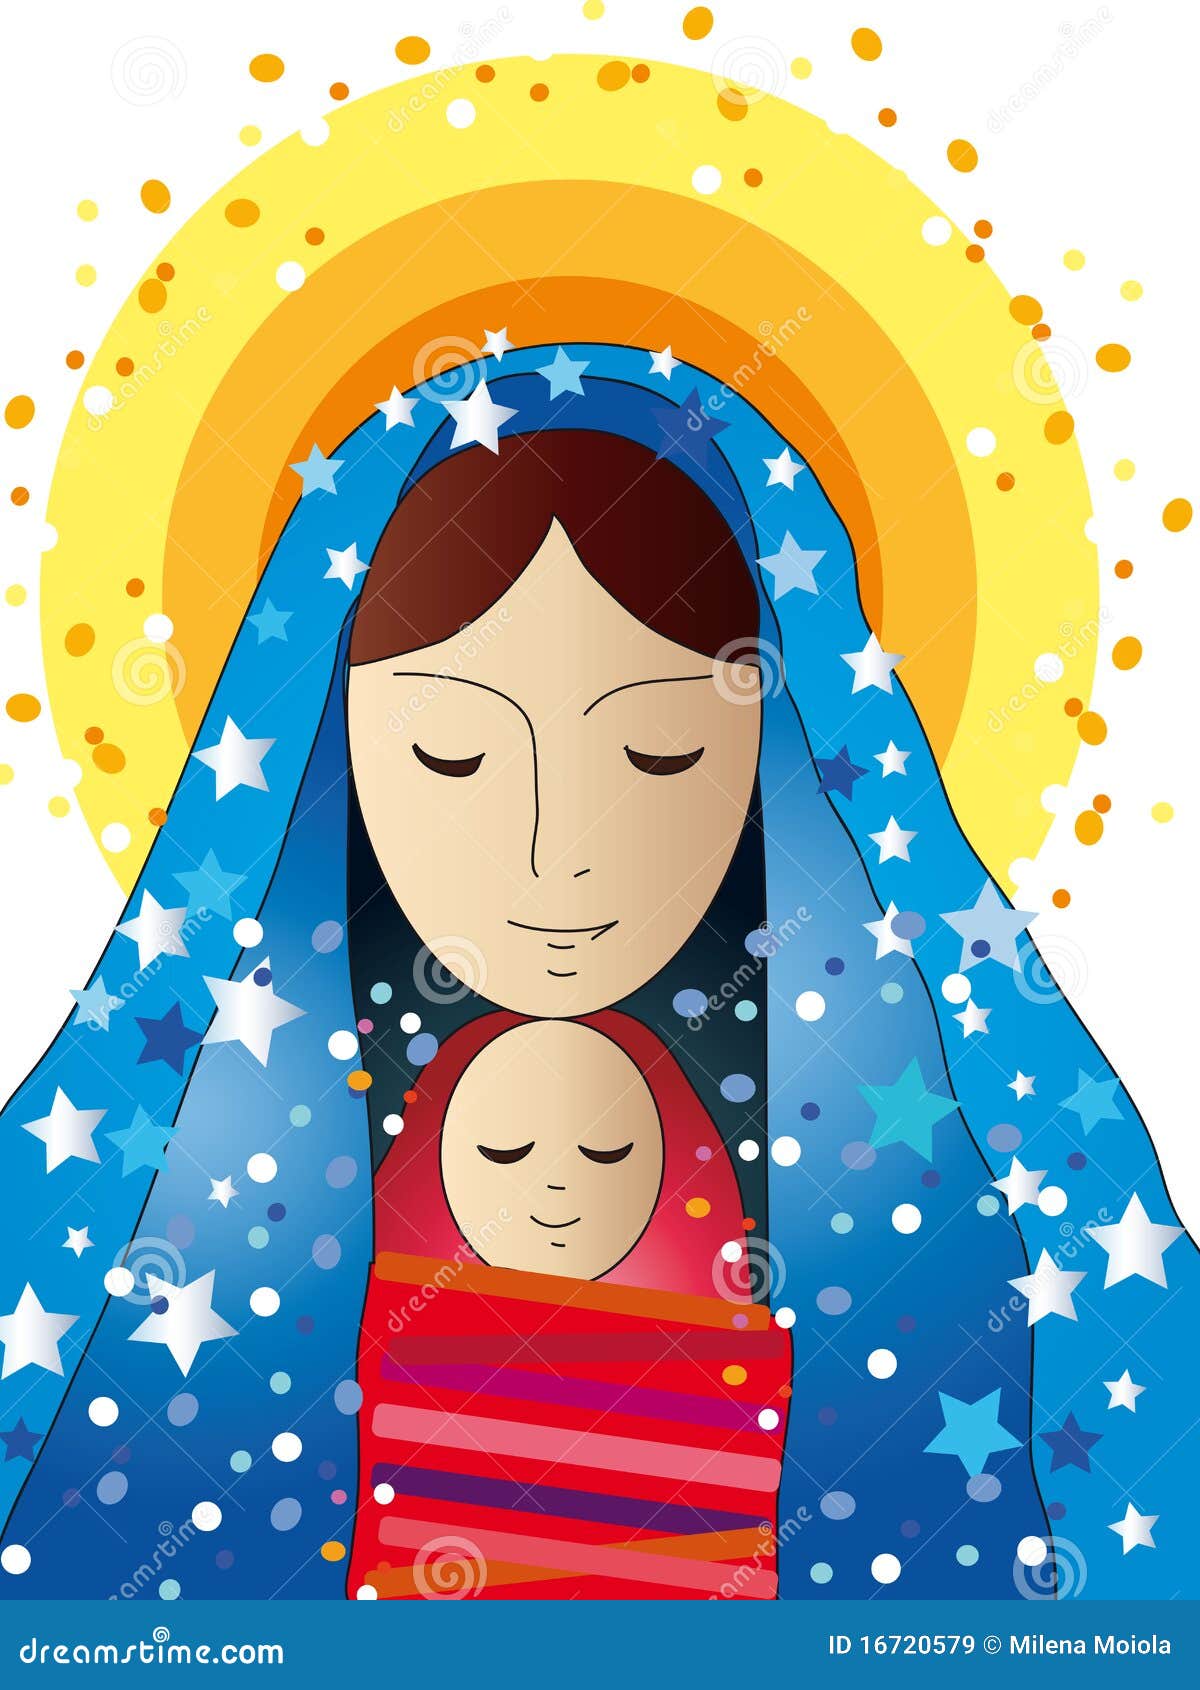 clipart of mary the mother of jesus - photo #20